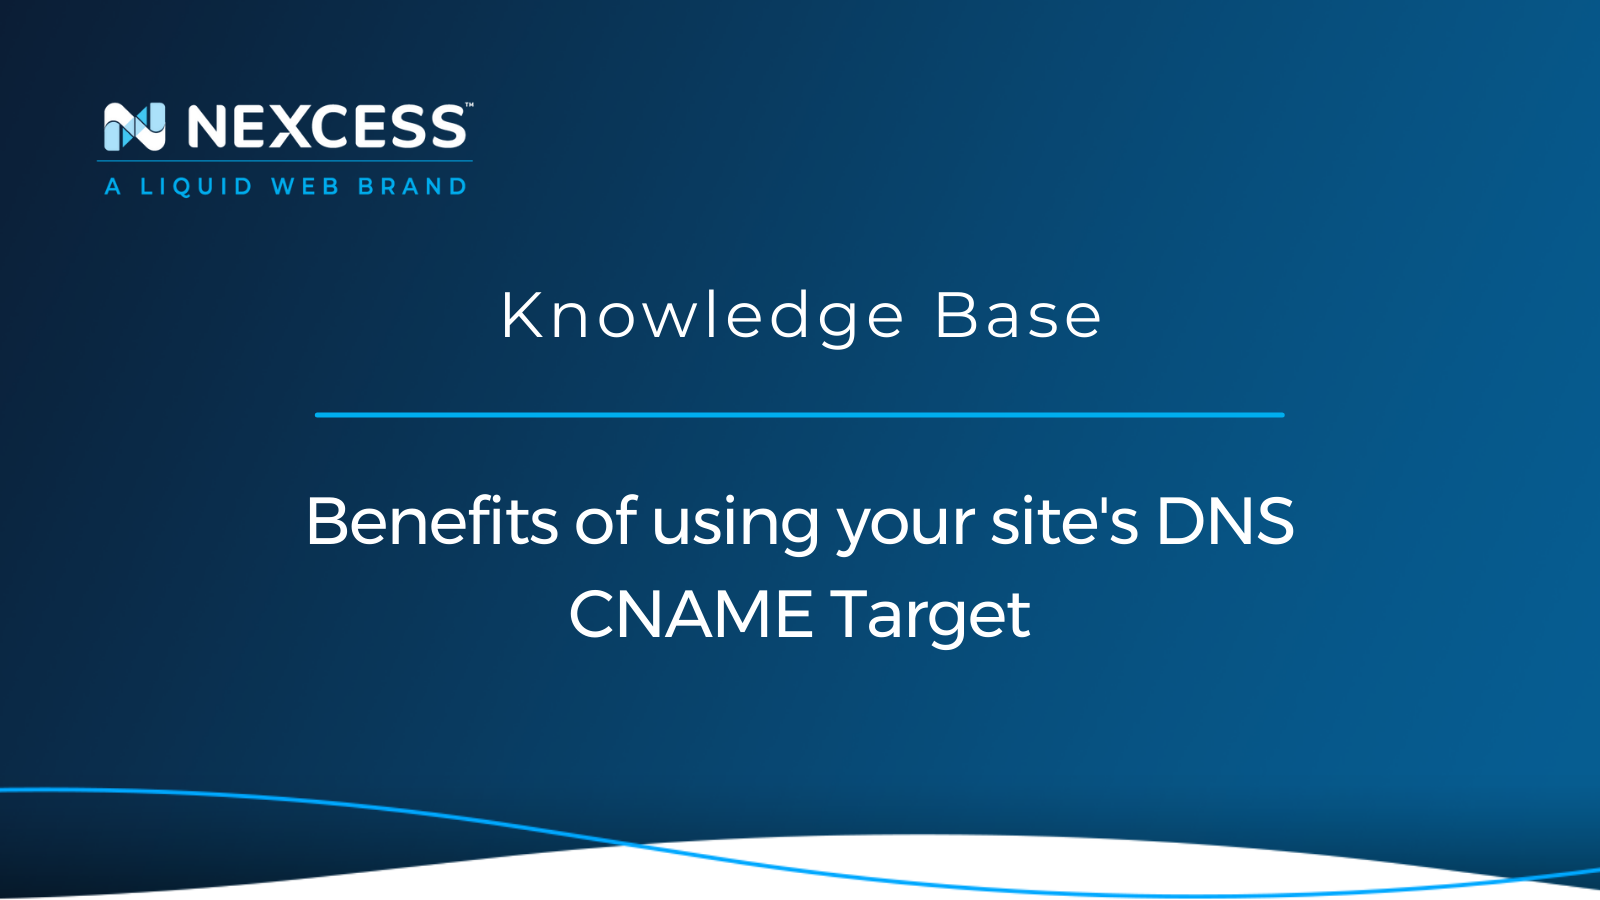 Benefits of using your site's DNS CNAME Target